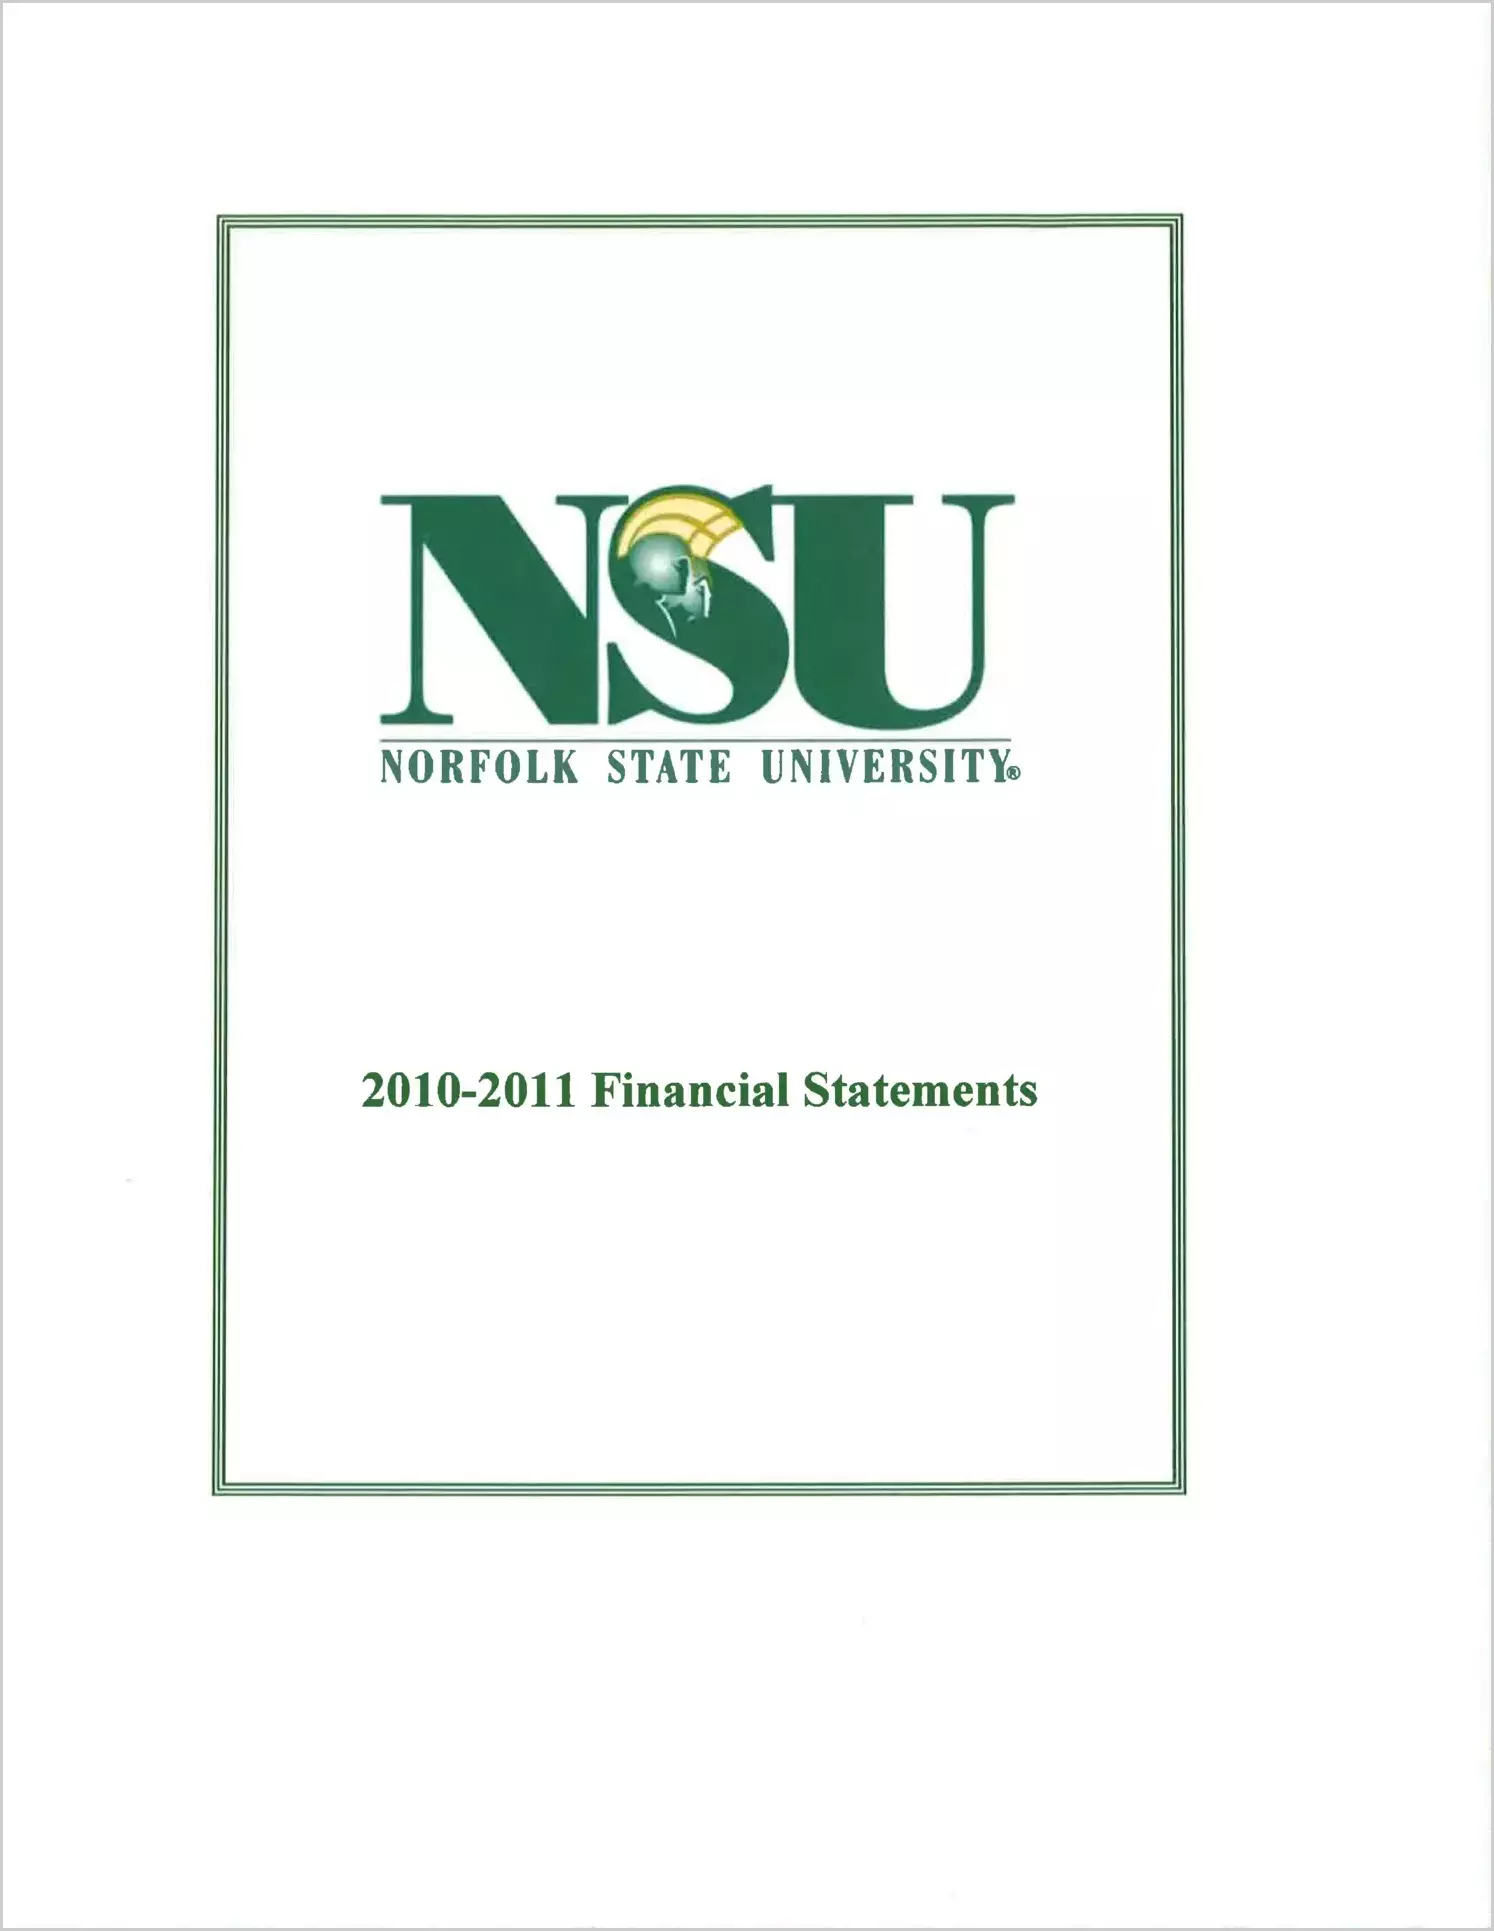 Norfolk State University Financial Statement Report for the year ended June 30, 2011